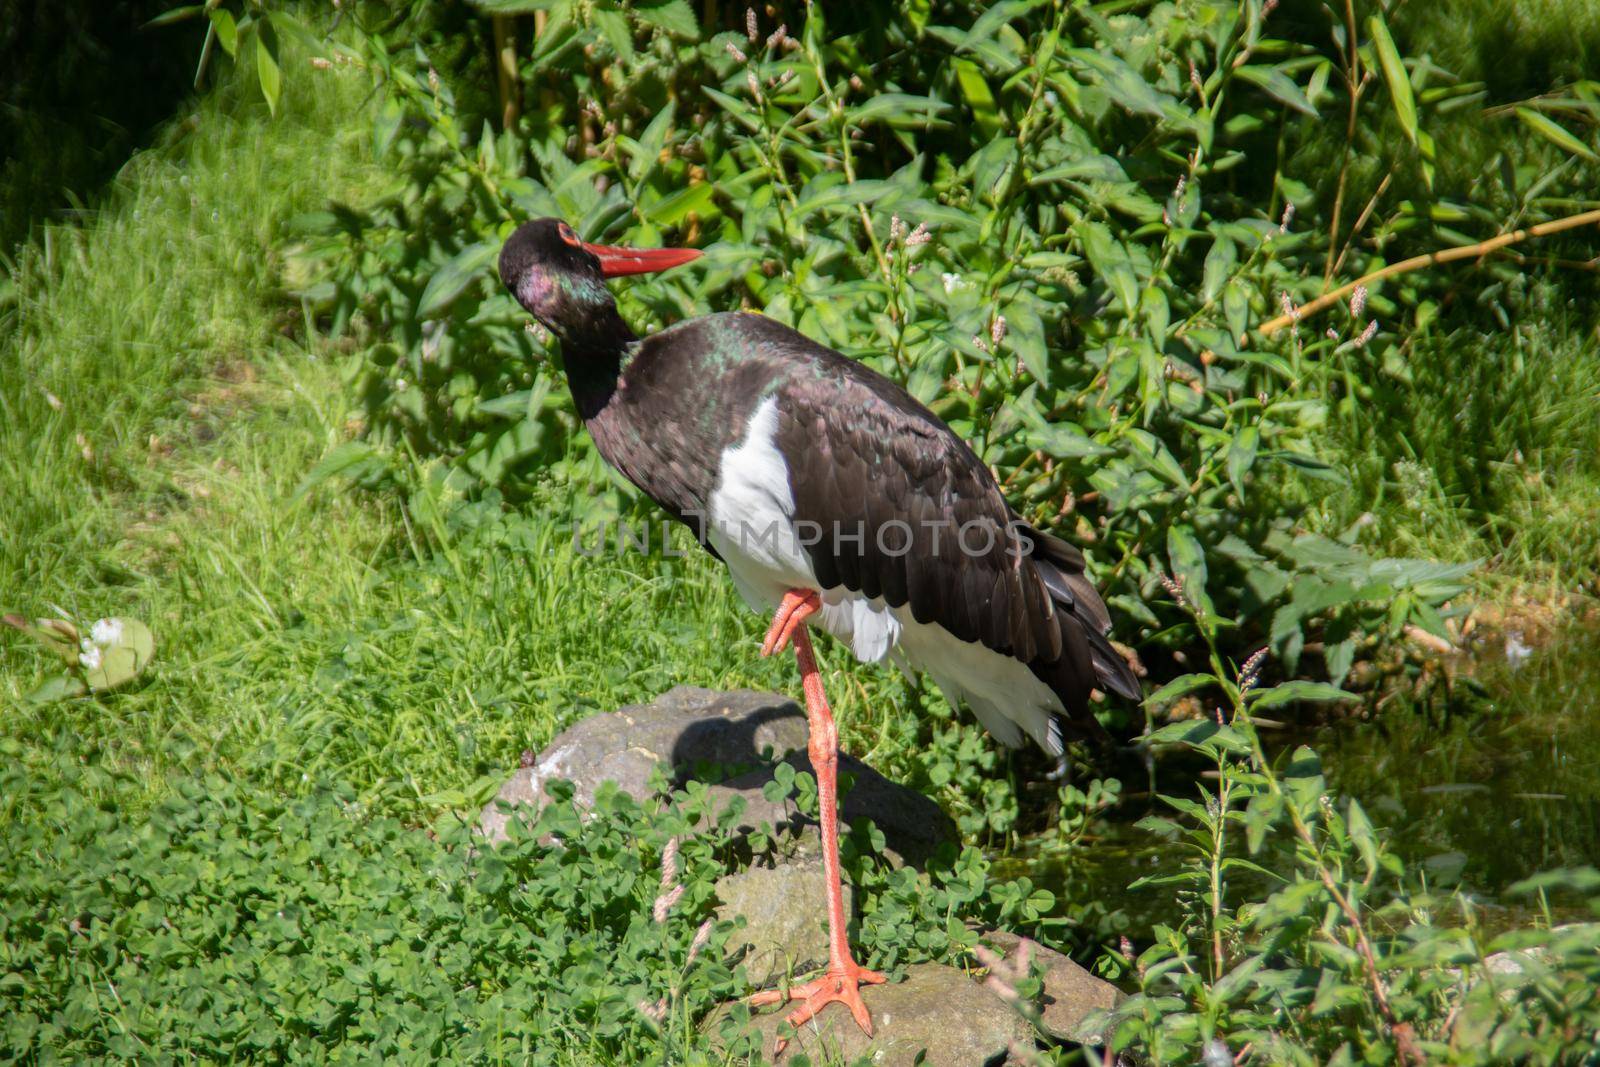 Black stork with a long red beak by Dr-Lange